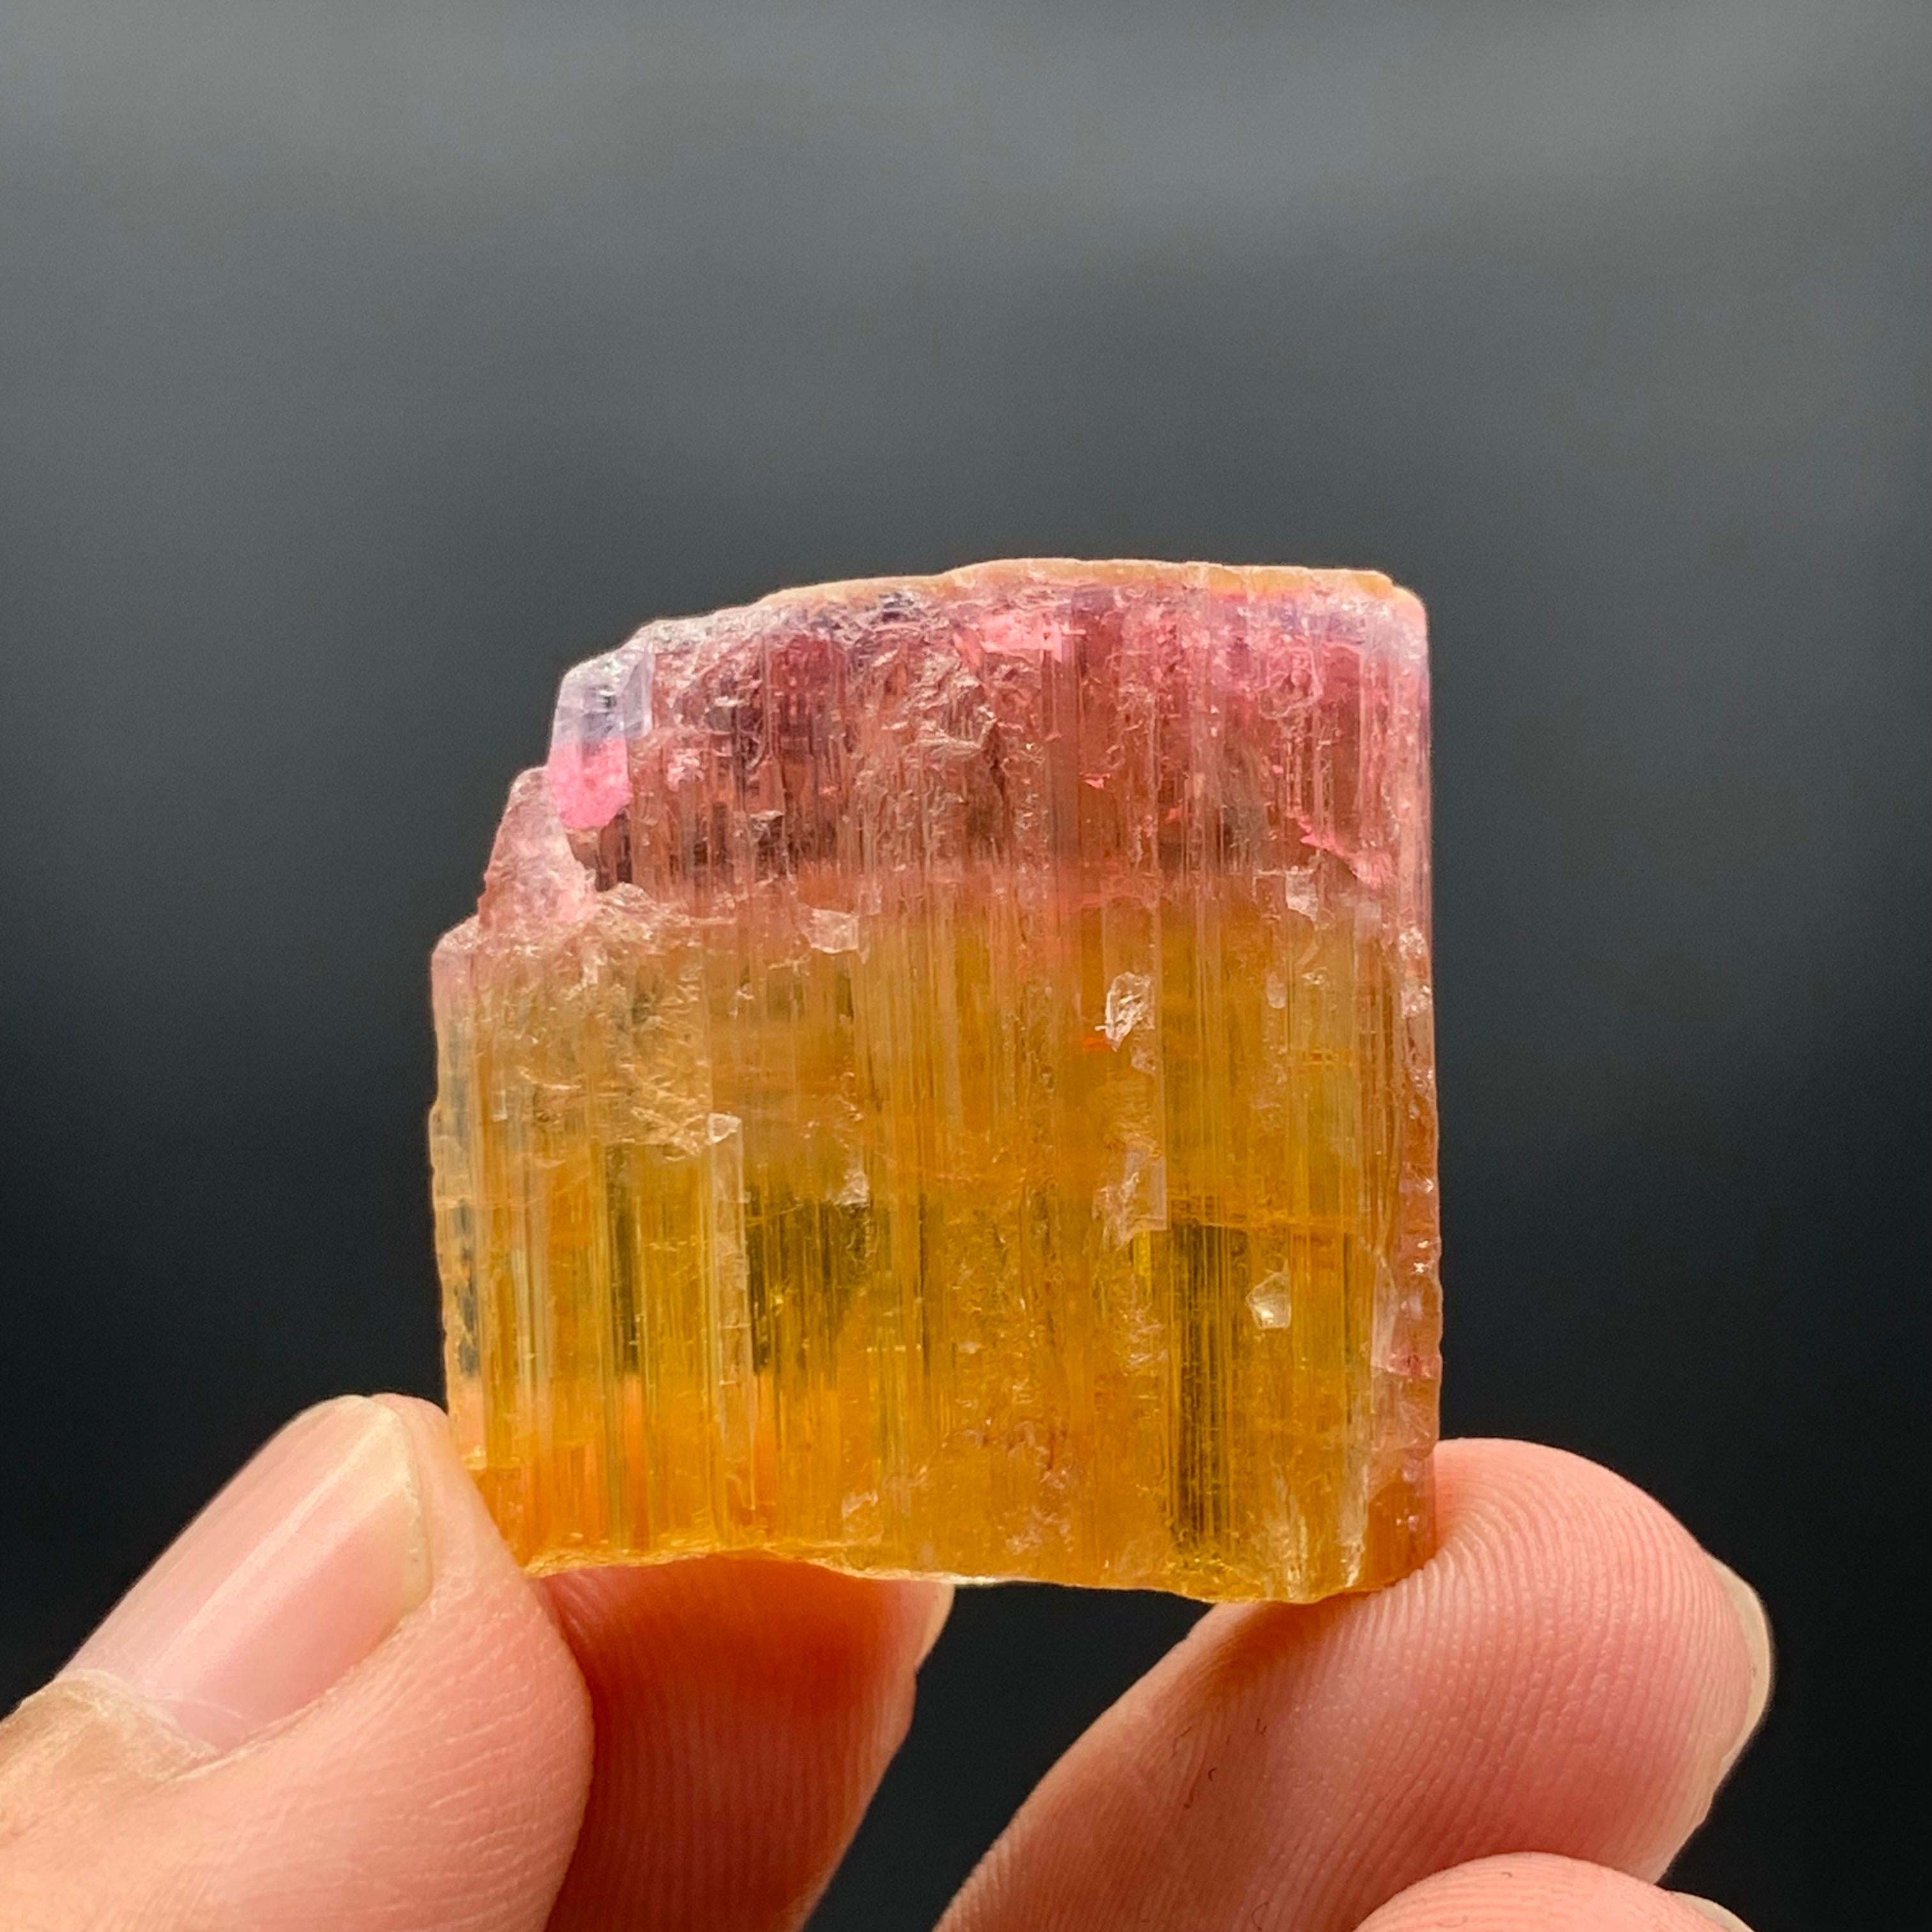 59.15 Carat Beautiful Bi Color Tourmaline Crystal From Paprook Mine, Afghanistan For Sale 1